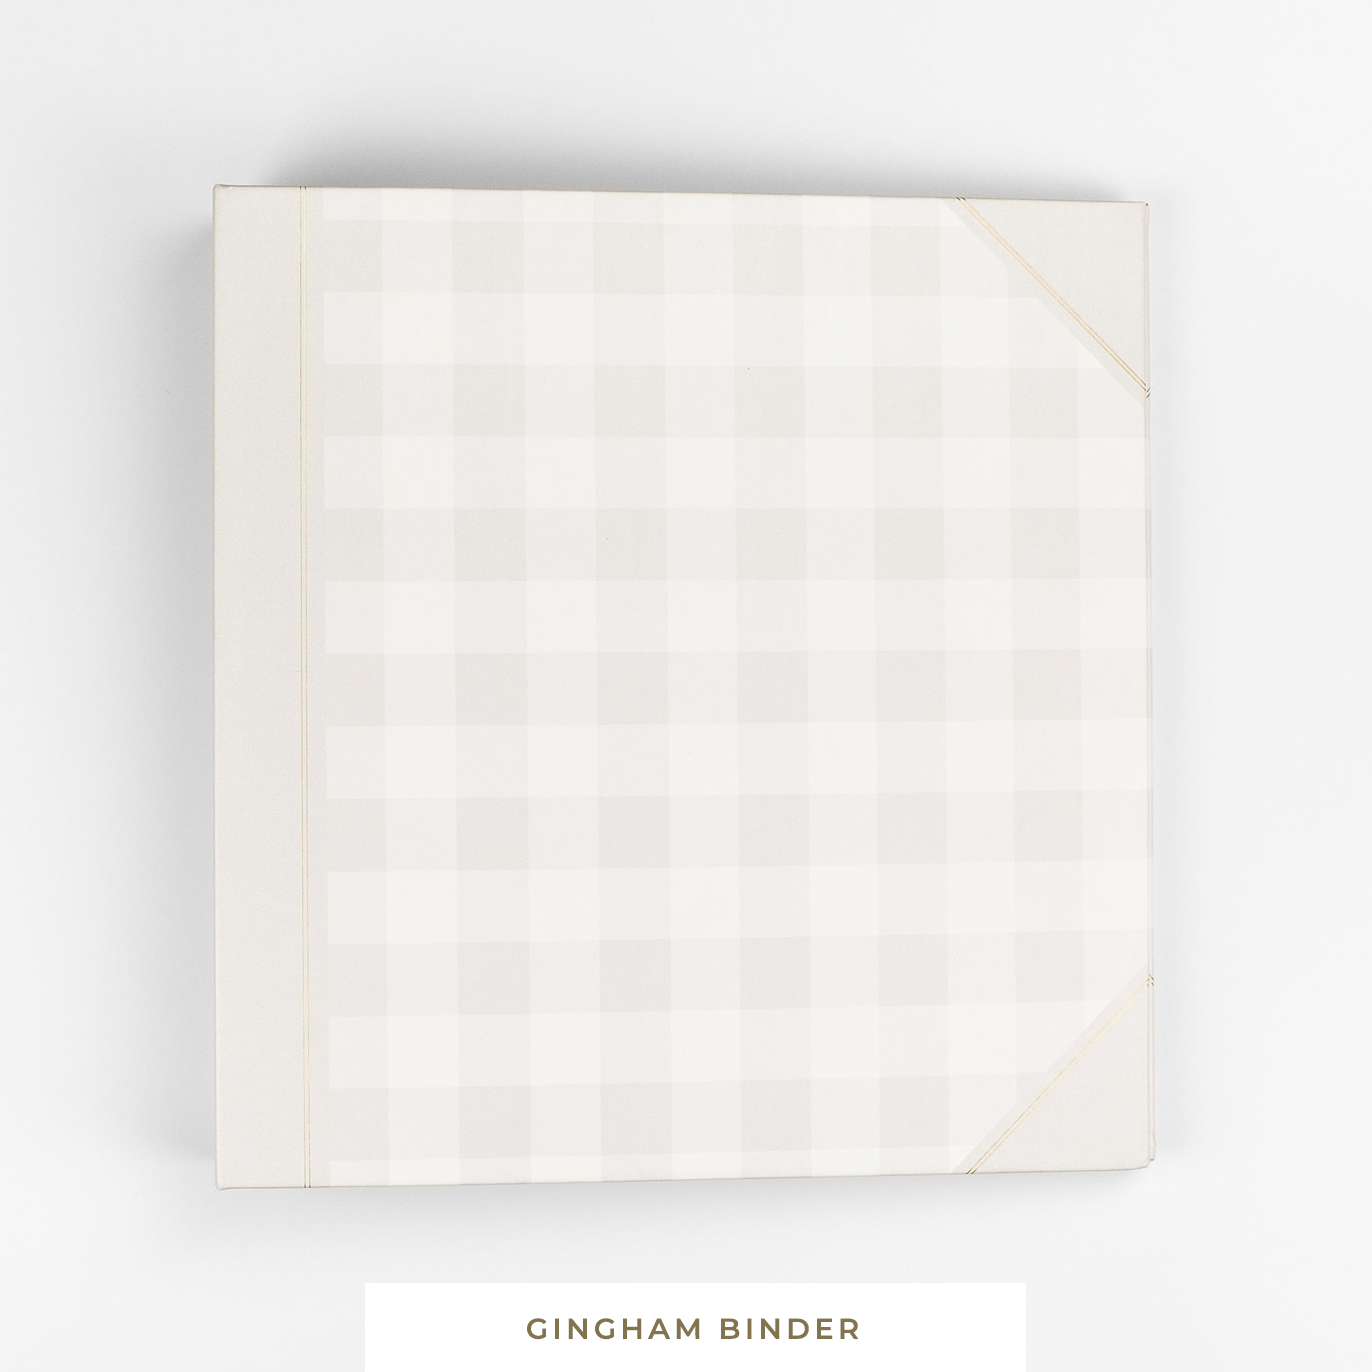 3-Ring Binder • Tan Gingham • Includes Page Protectors (25) & Tab Dividers